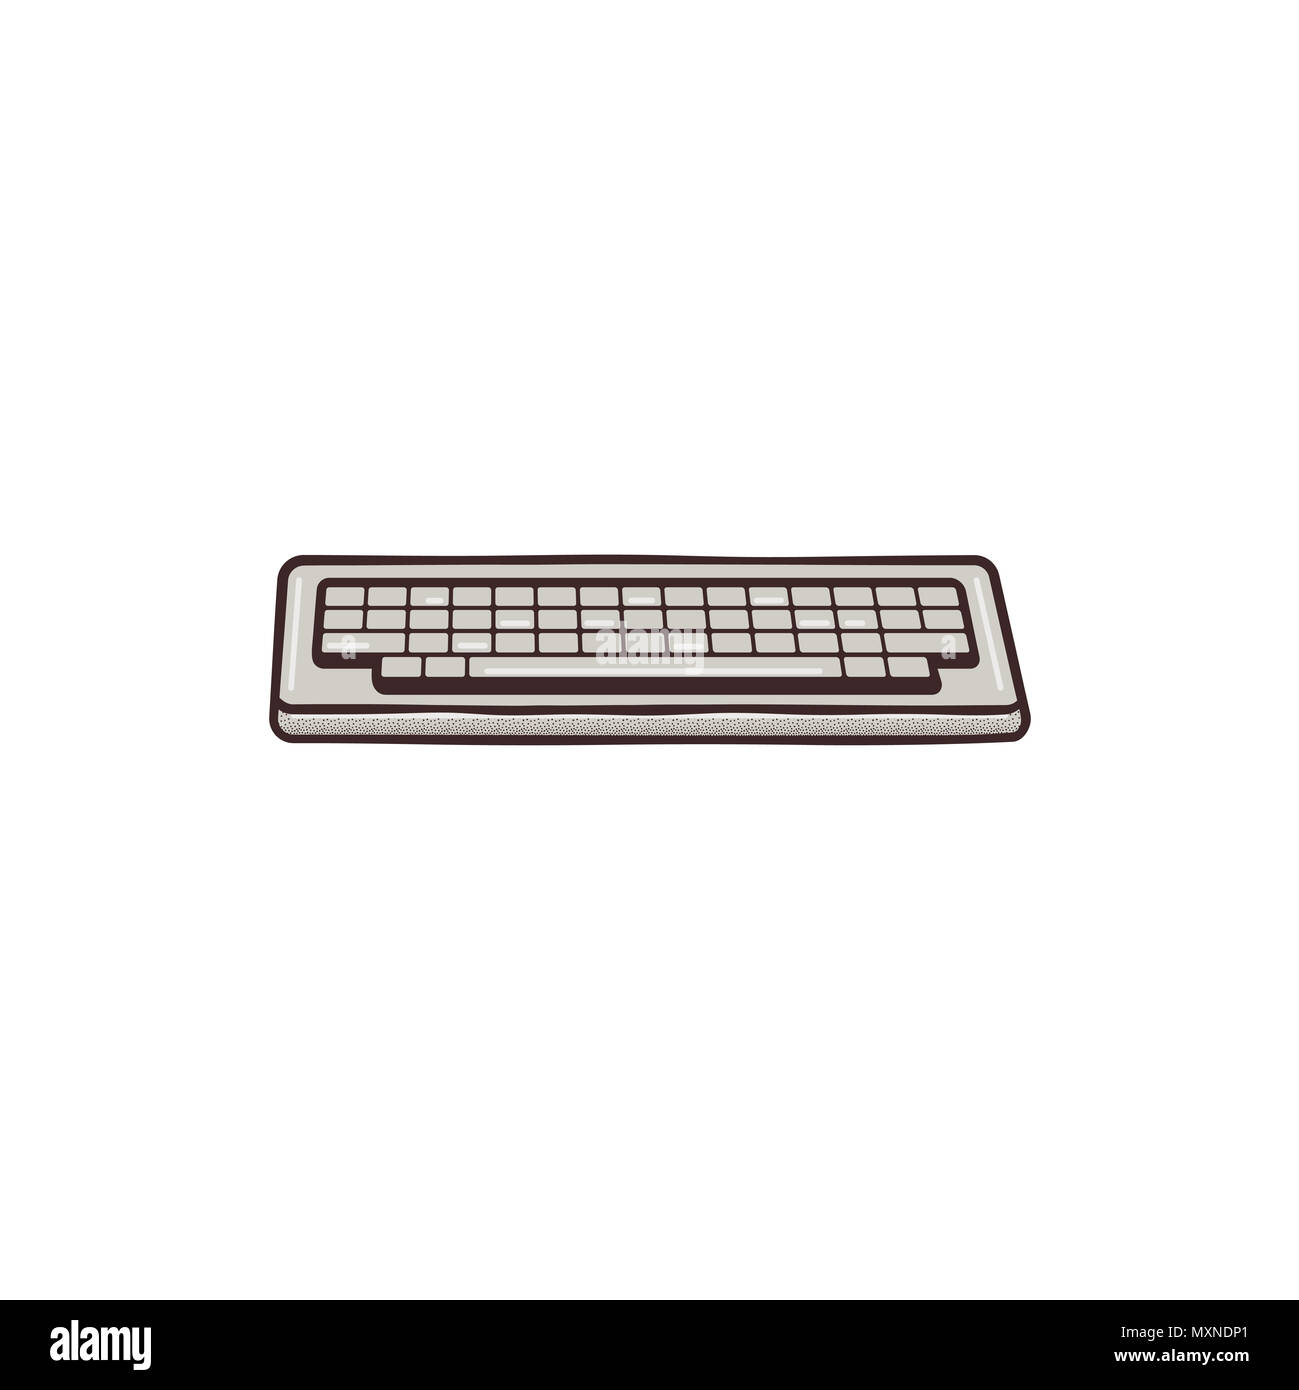 Vintage hadn drawn keyboard concept. Mixed flat and retro design. Personal computer equipment. Stock isolated pn white background Stock Photo